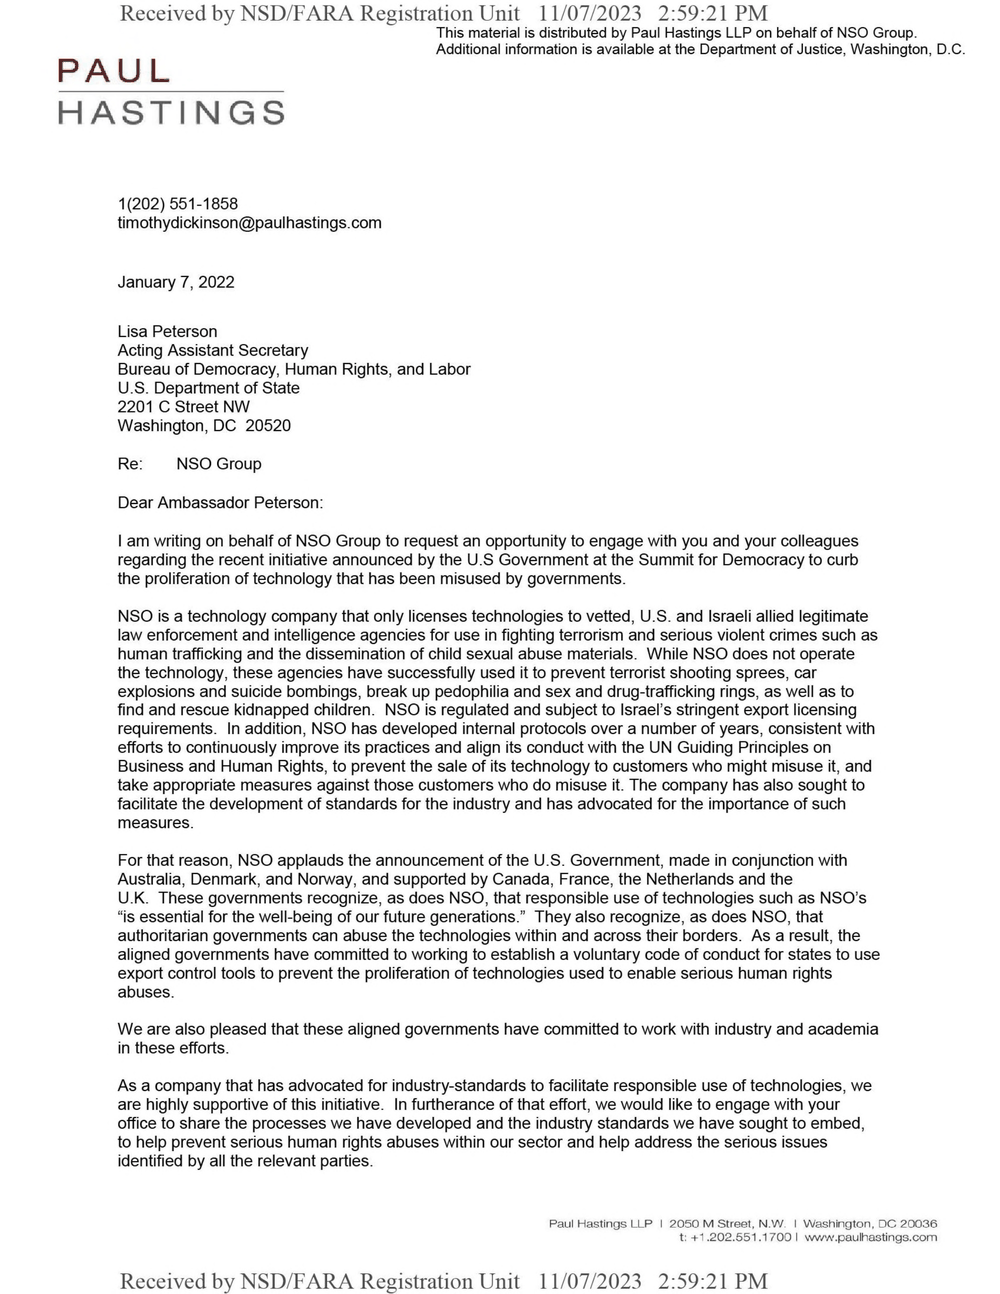 Page 5 from NSO Lobbyists’ “Urgent” Request for Meeting With Antony Blinken